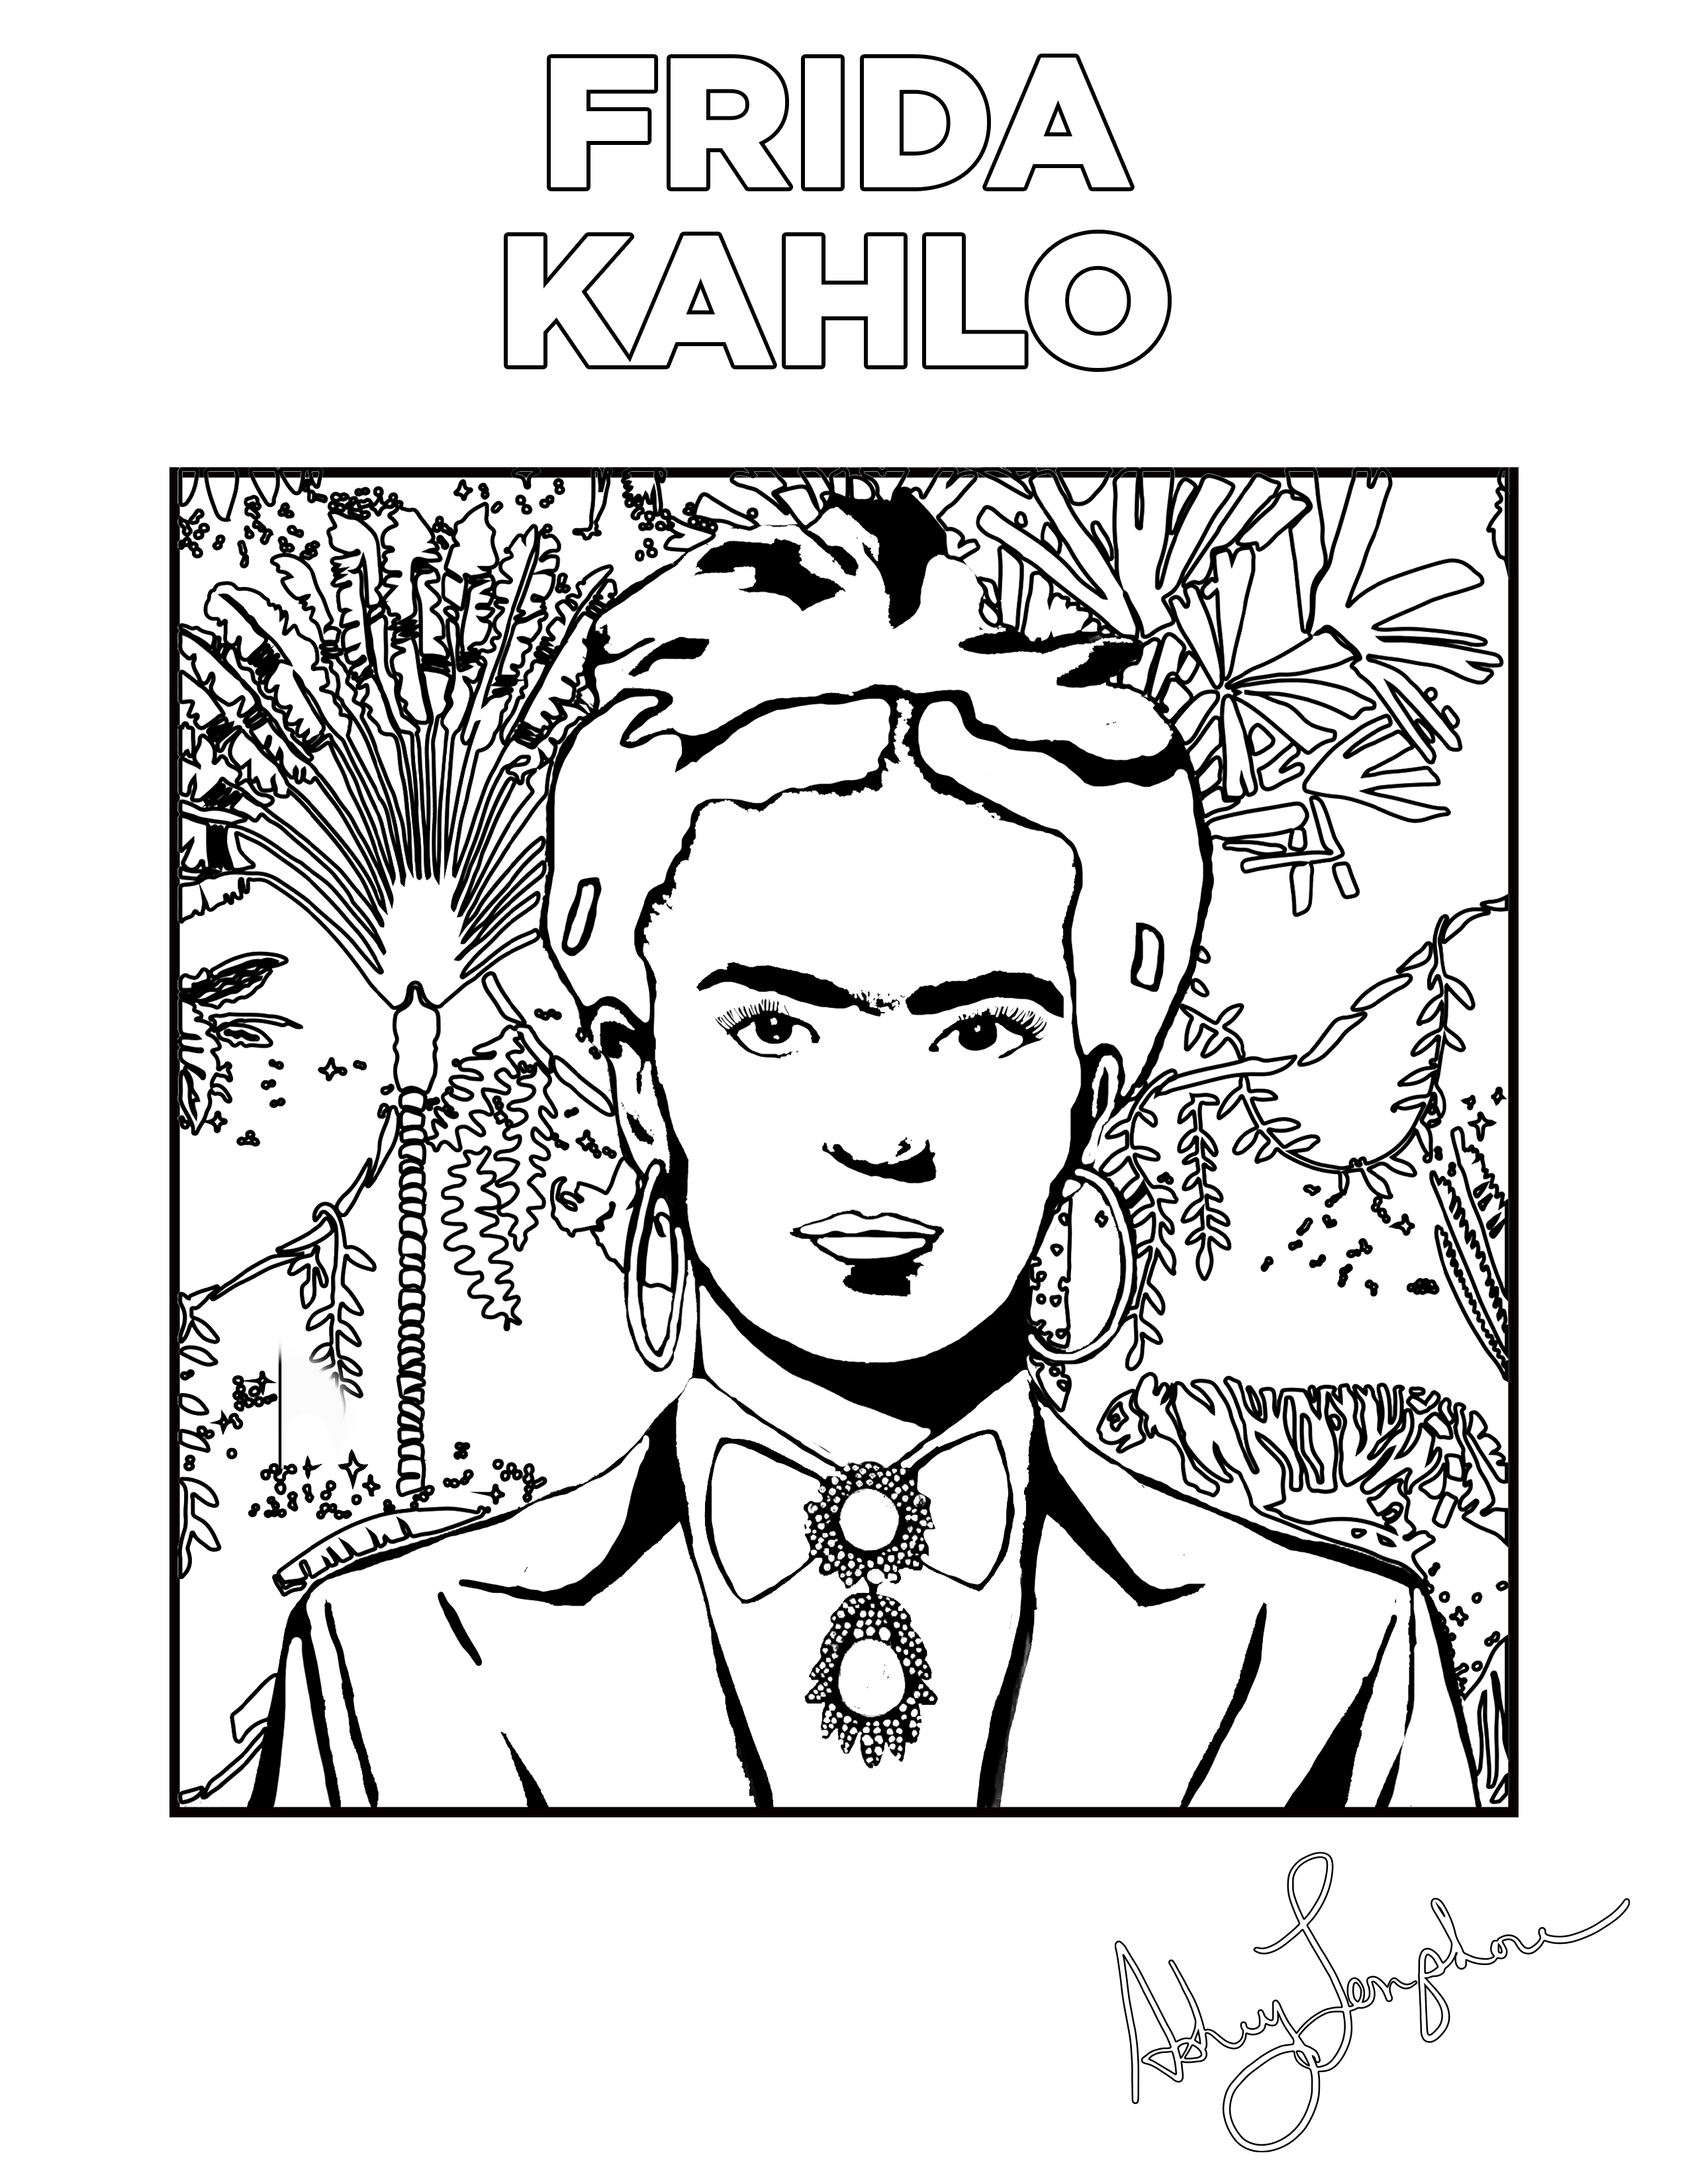 Ashley Longshore coloring pages featuring Frida Kahlo.